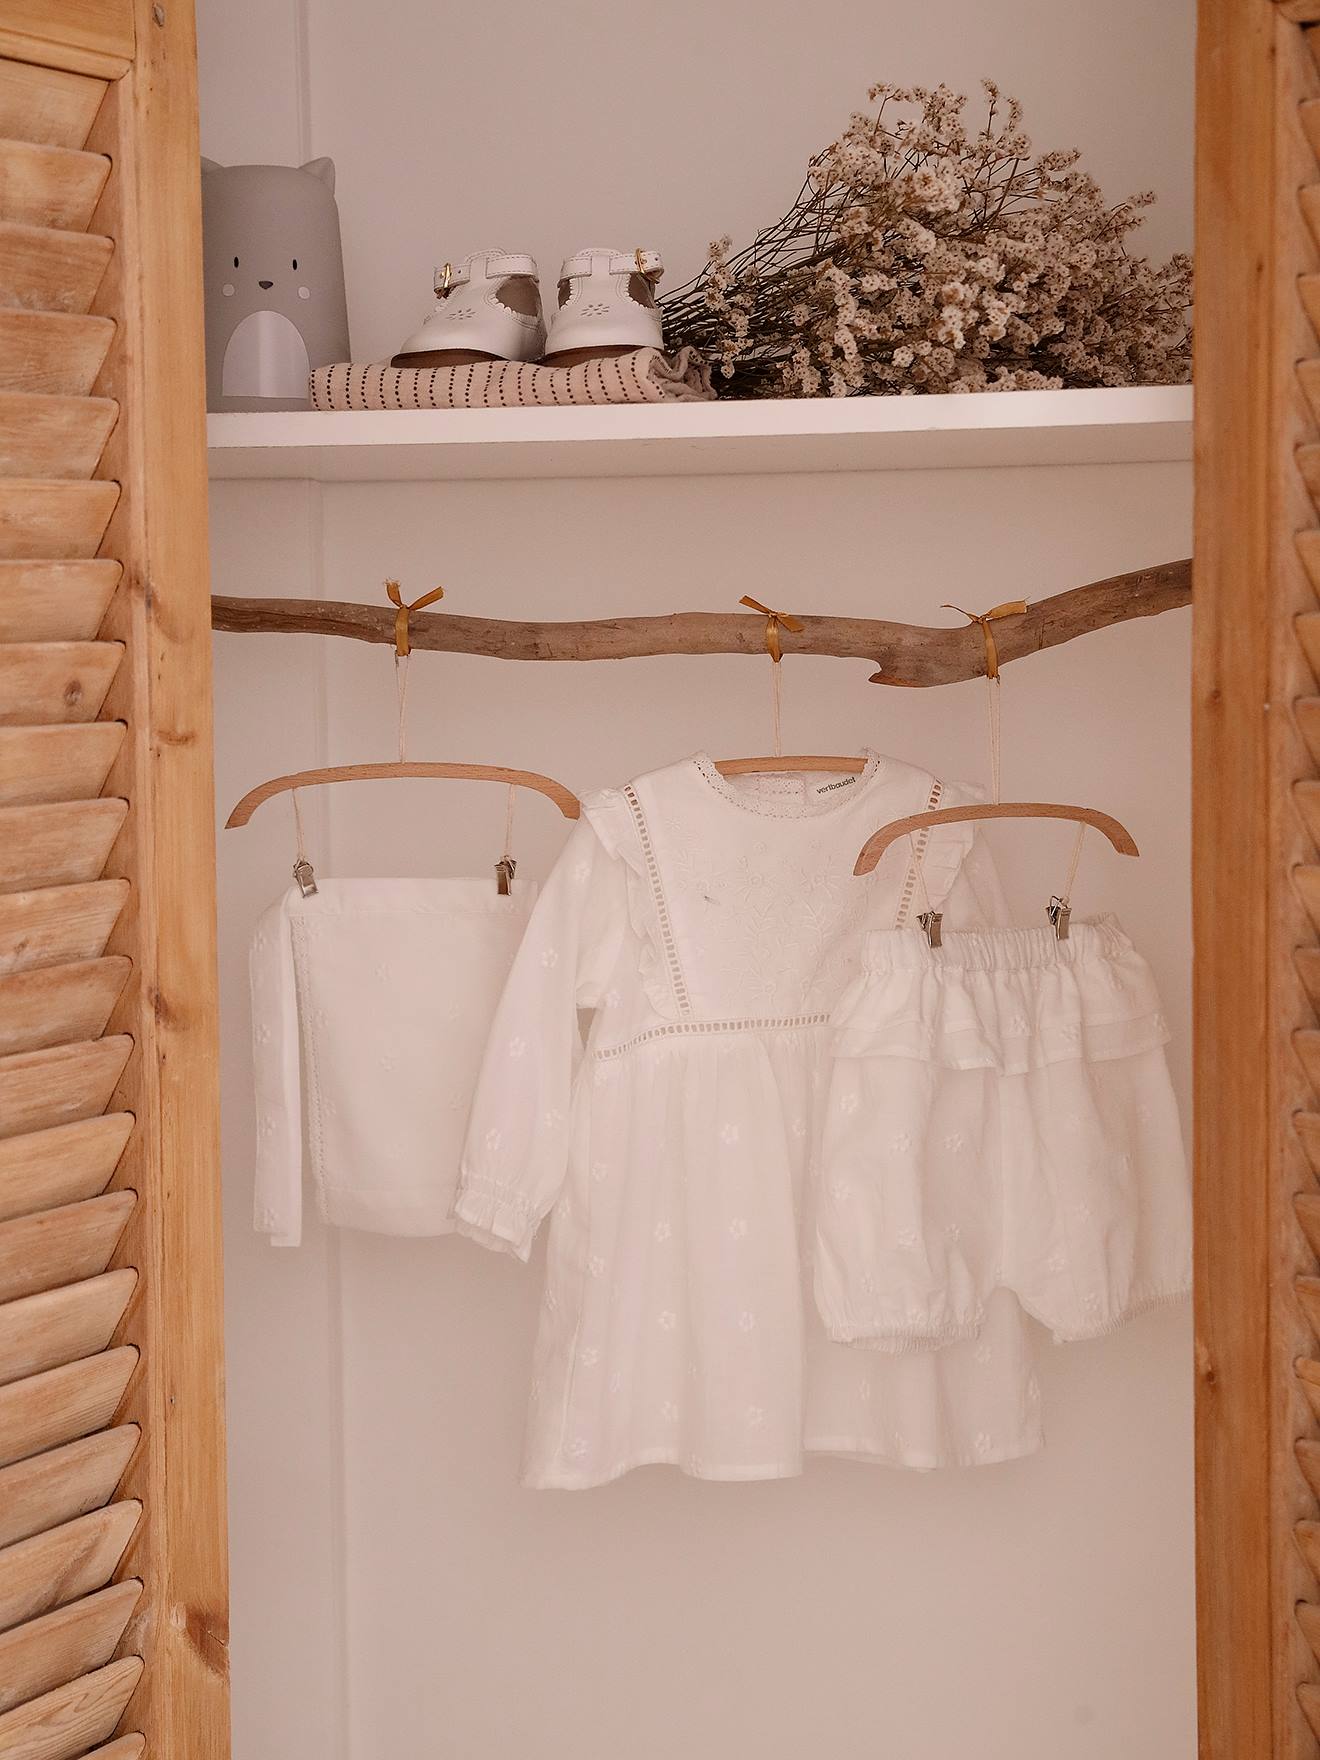 Occasion Wear Ensemble for Babies: Dress, Bloomers and Bonnet white